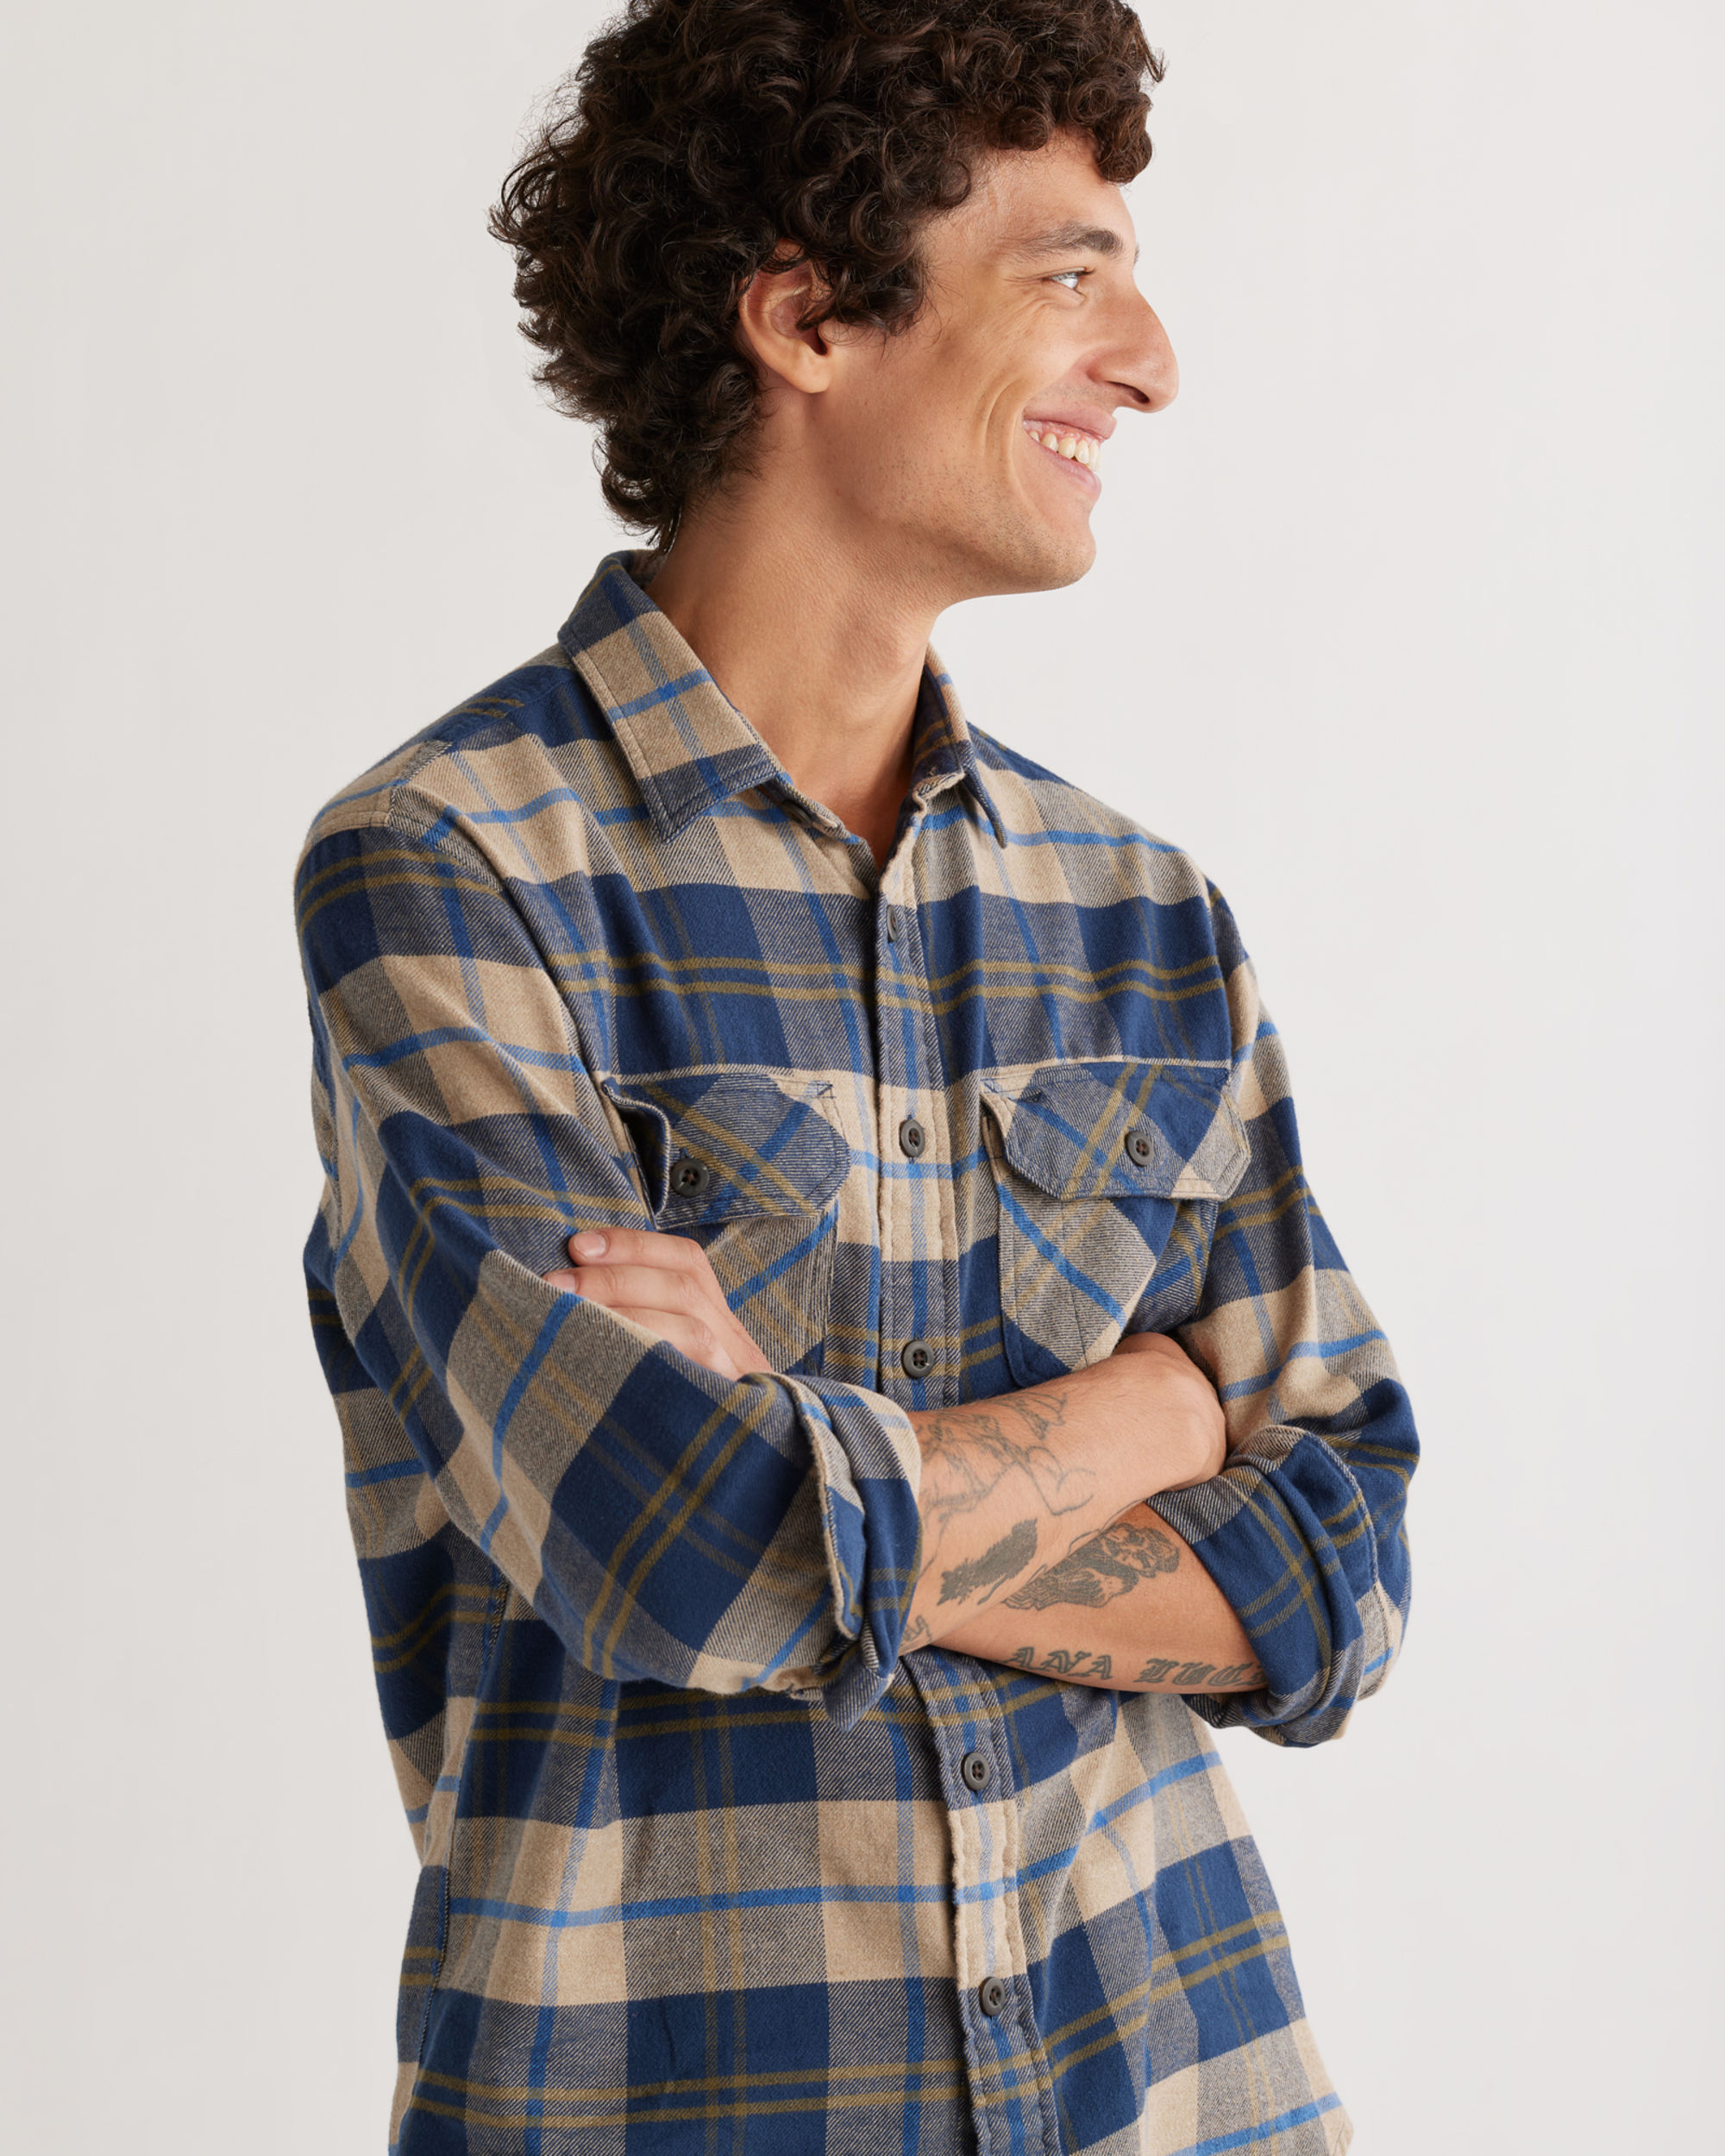 Burnside Double-Brushed Flannel Shirt in Tan, Navy and Bronze